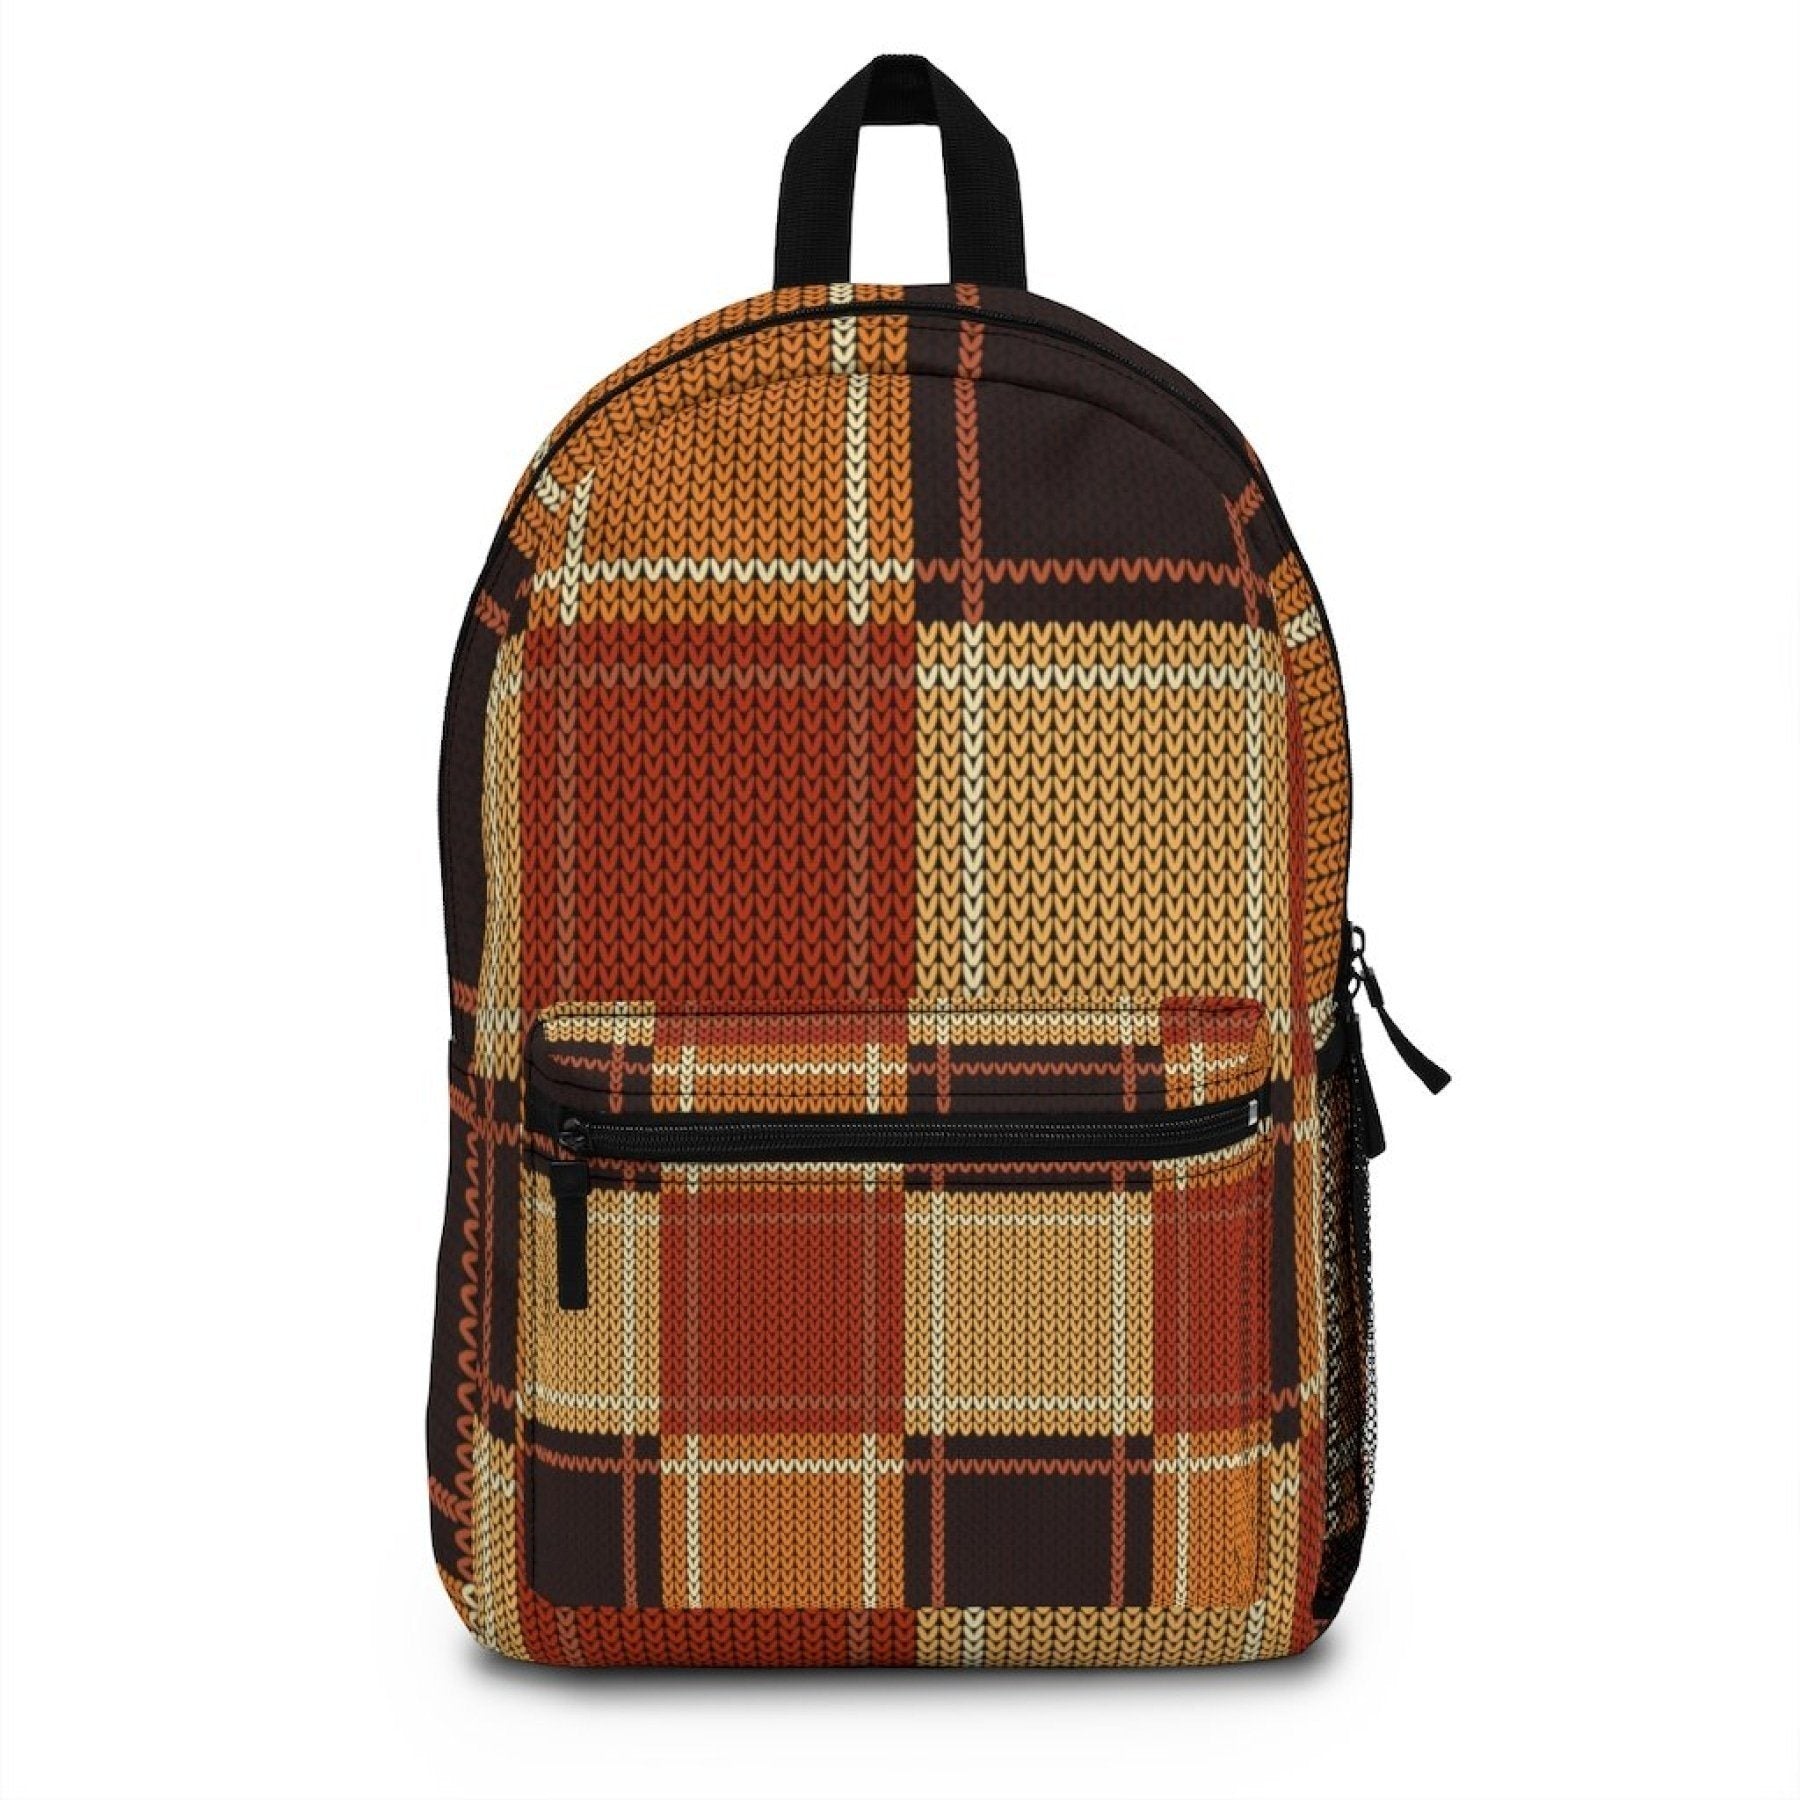 A durable and lightweight Backpack Bag with an orange, brown and black plaid pattern.